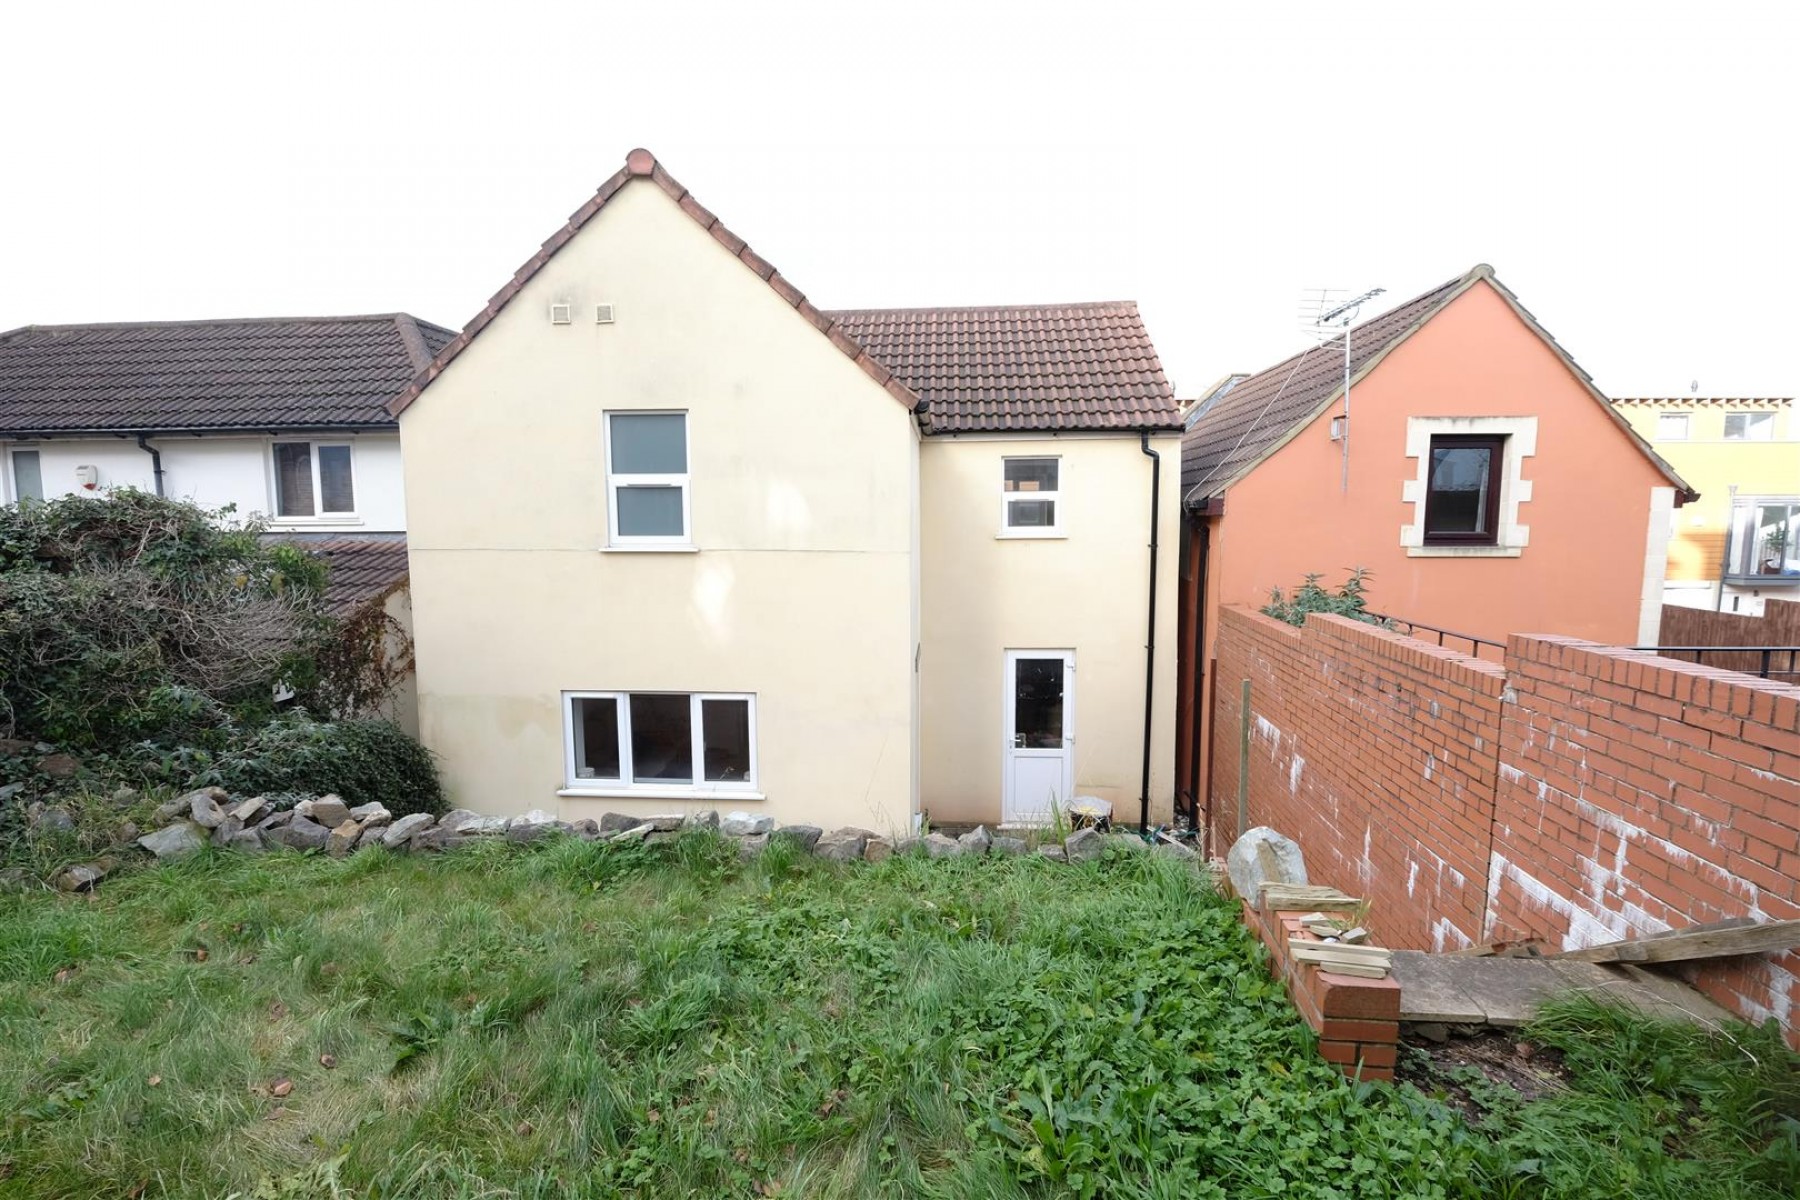 Images for REDUCED PRICE FOR AUCTION - TOTTERDOWN